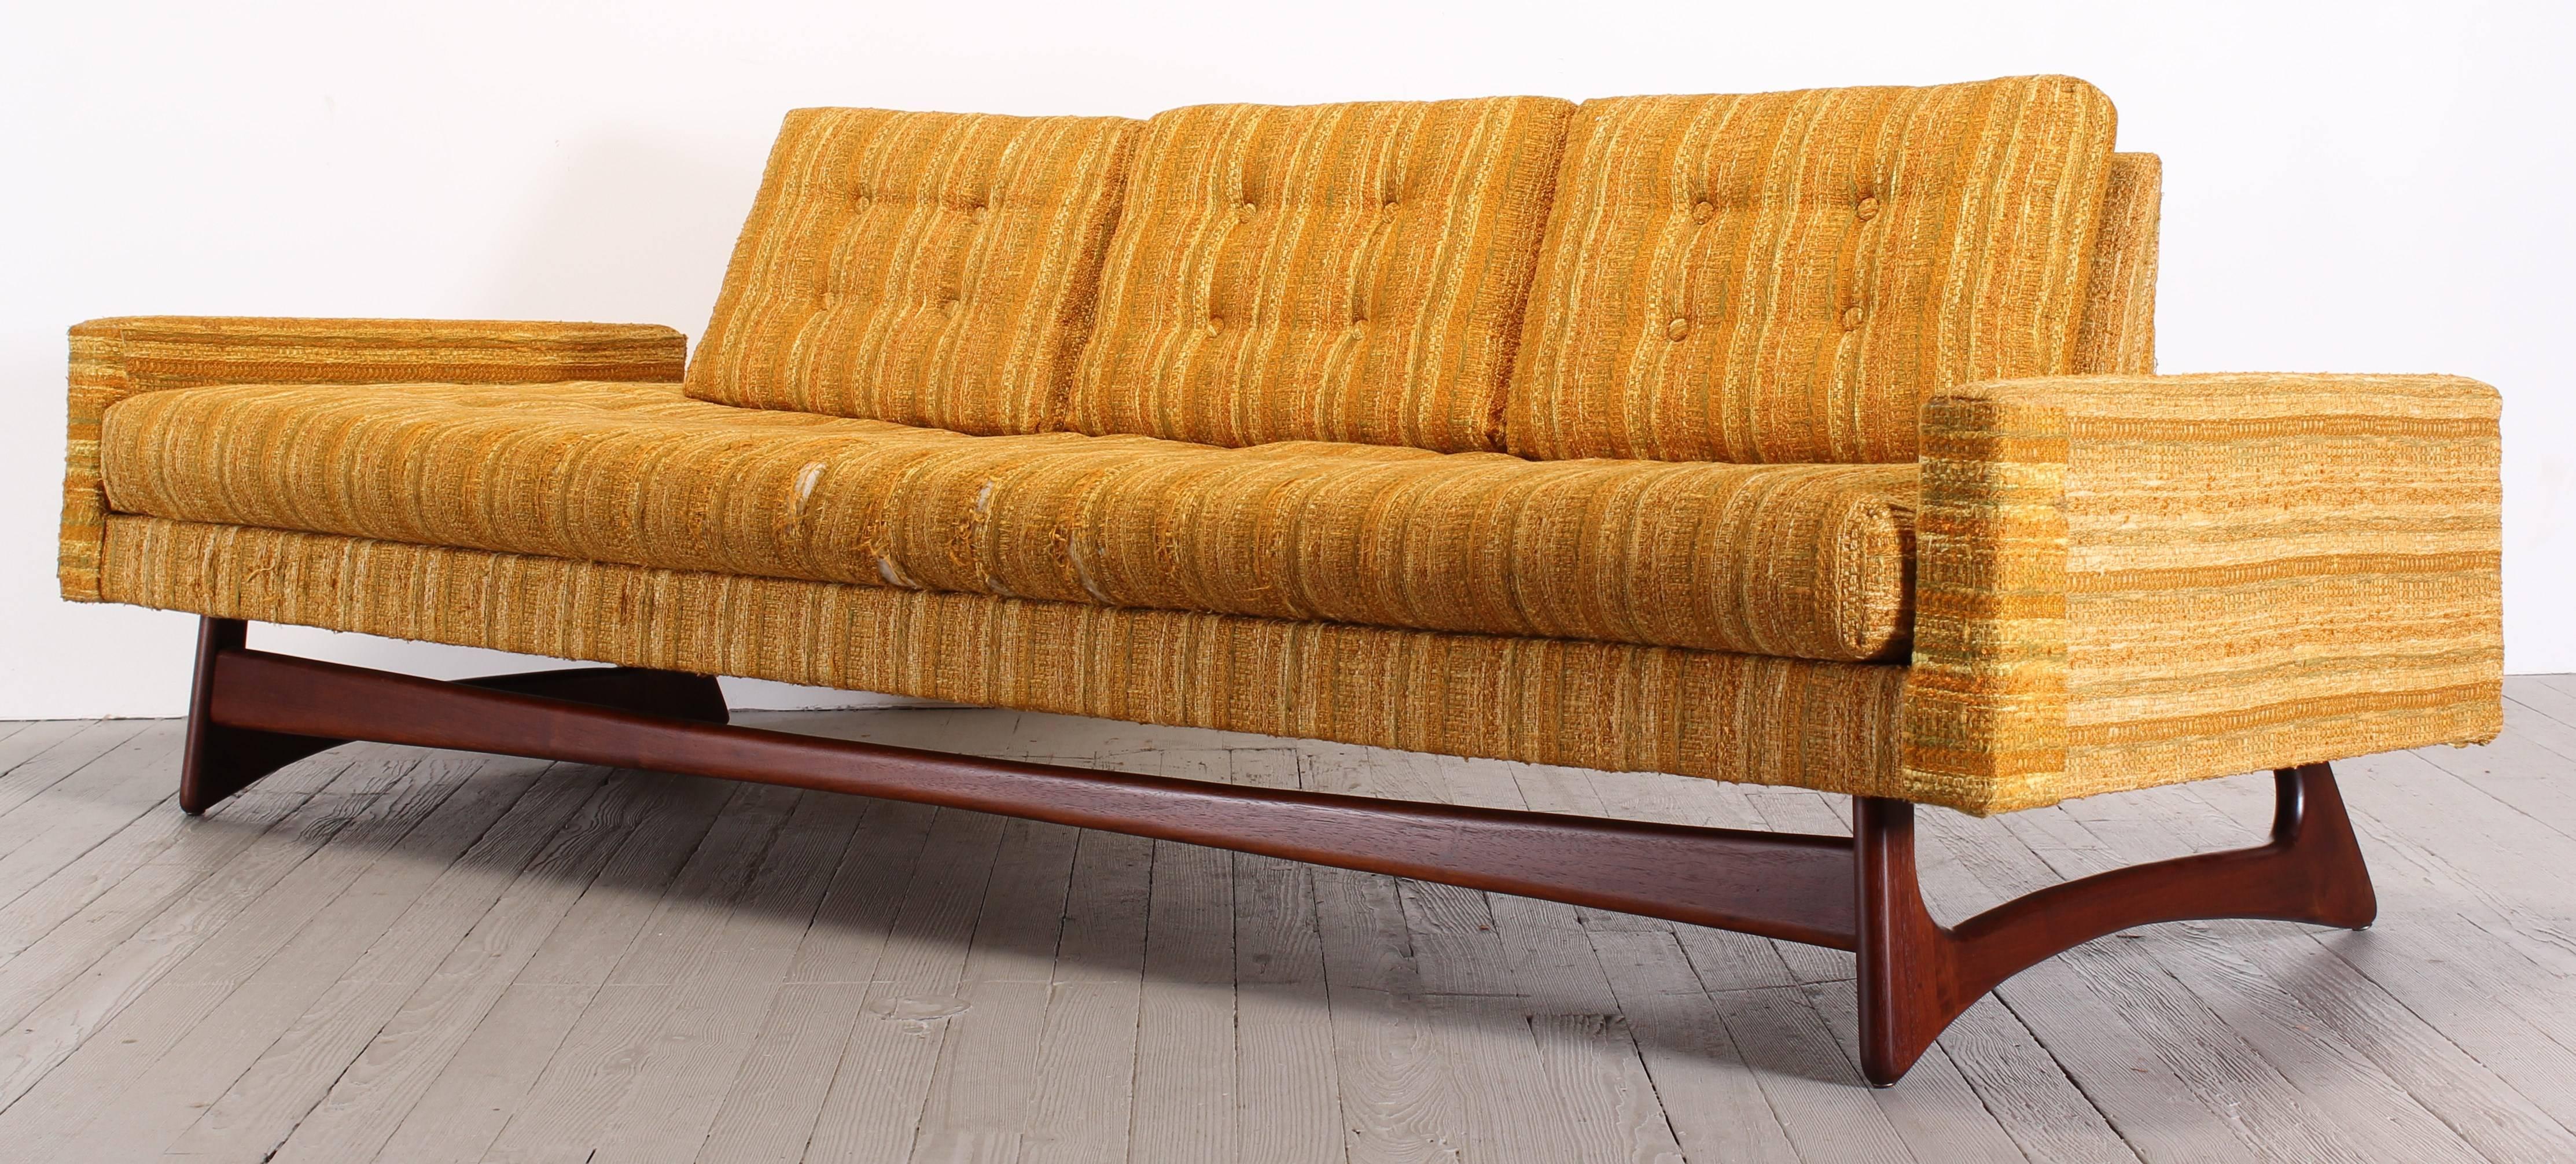 American Sofa, Model 2408 by Adrian Pearsall for Craft Associates, 1960